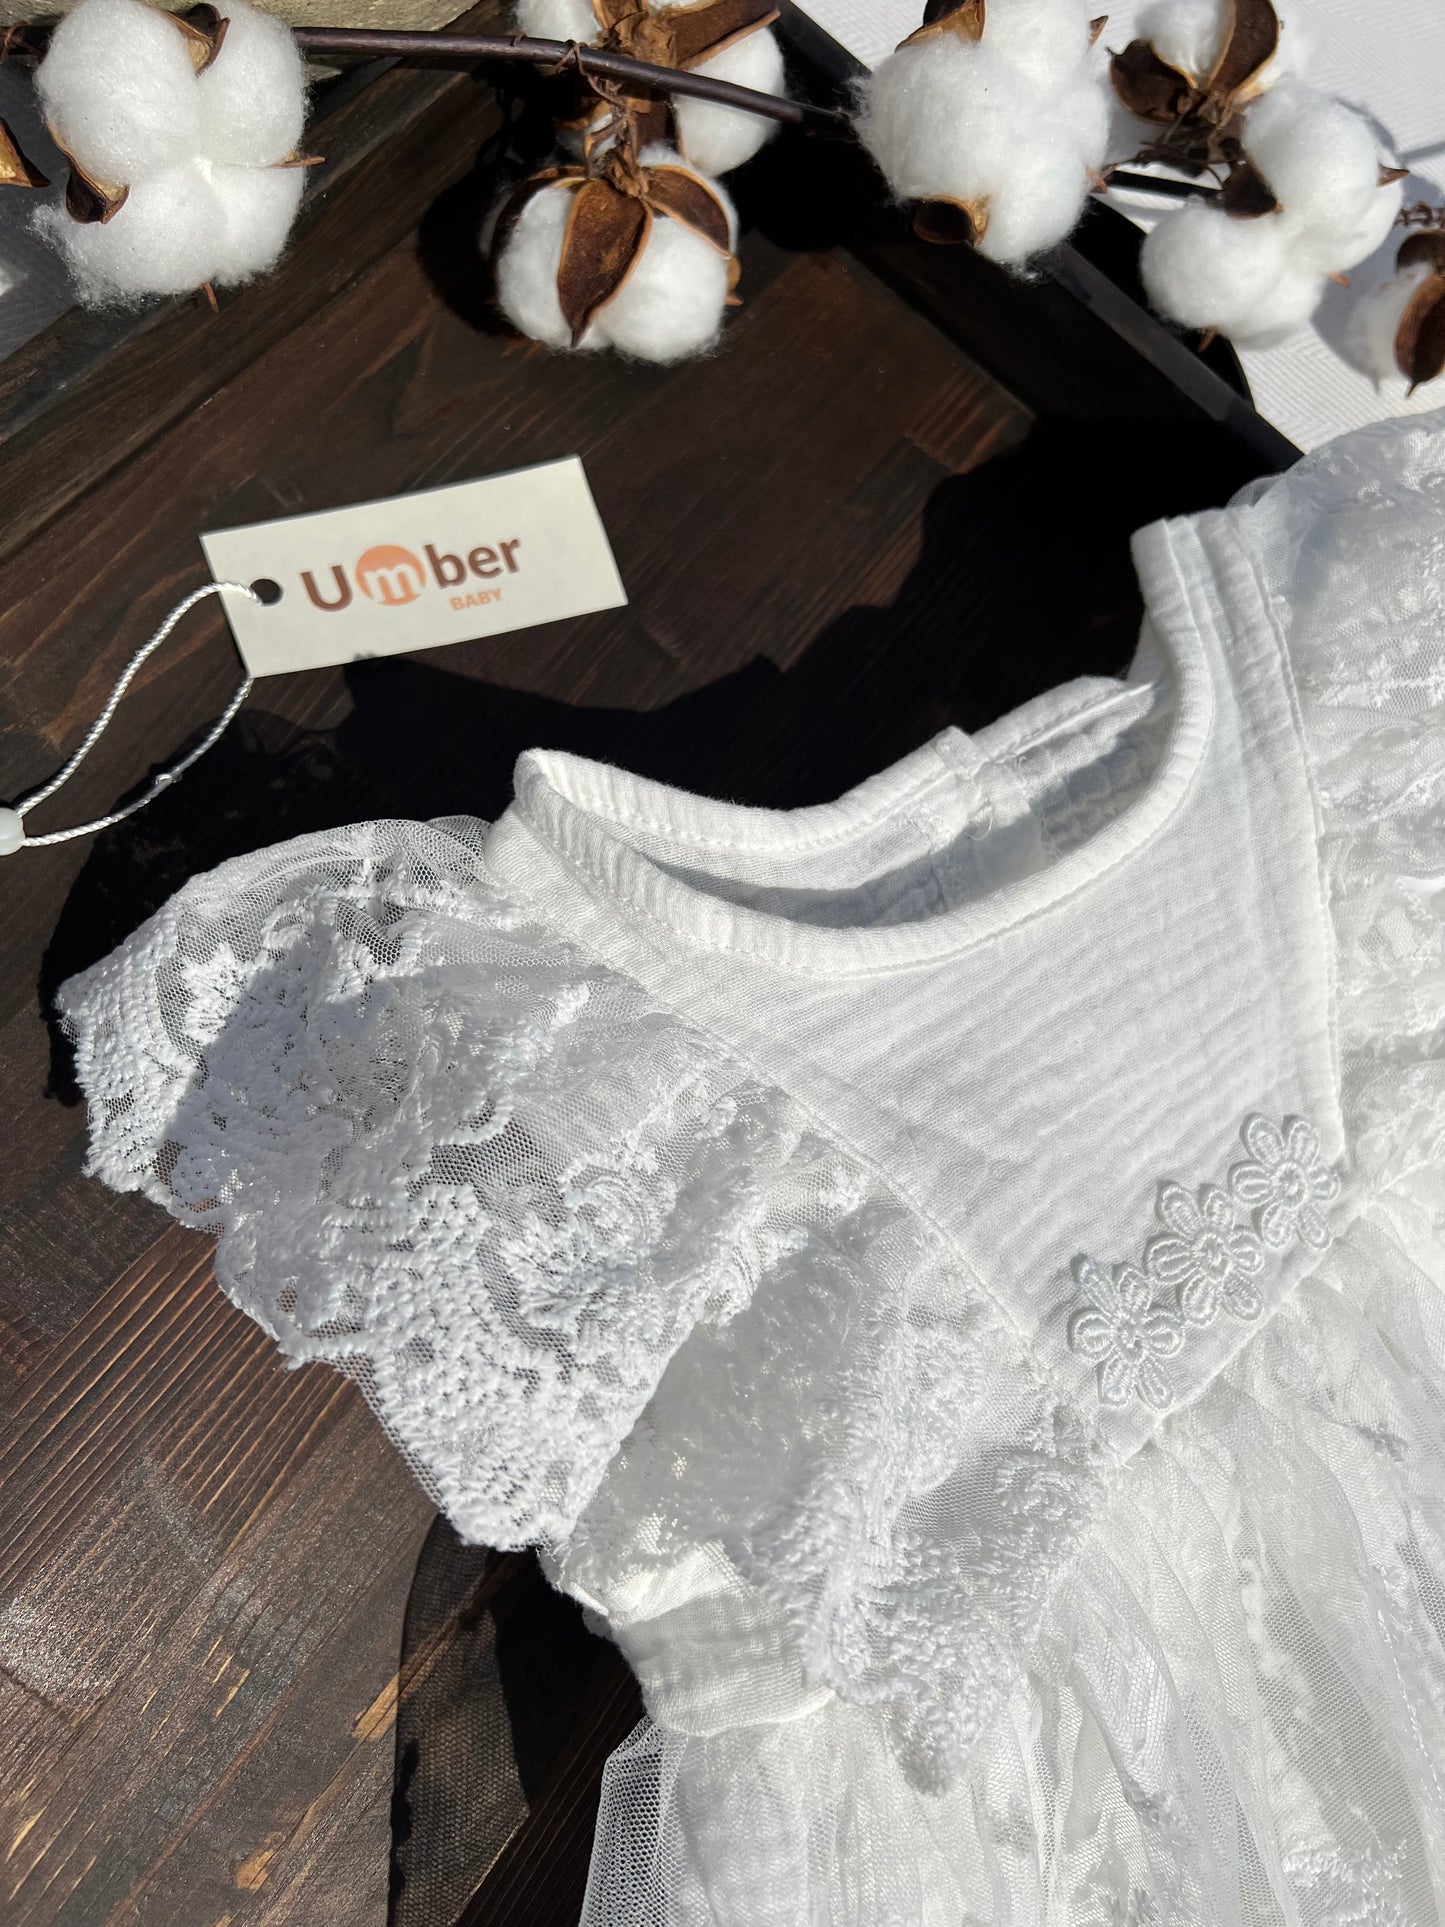 White Lace Ruffle Sleeve Baby Dress with Embroidered Flower Details